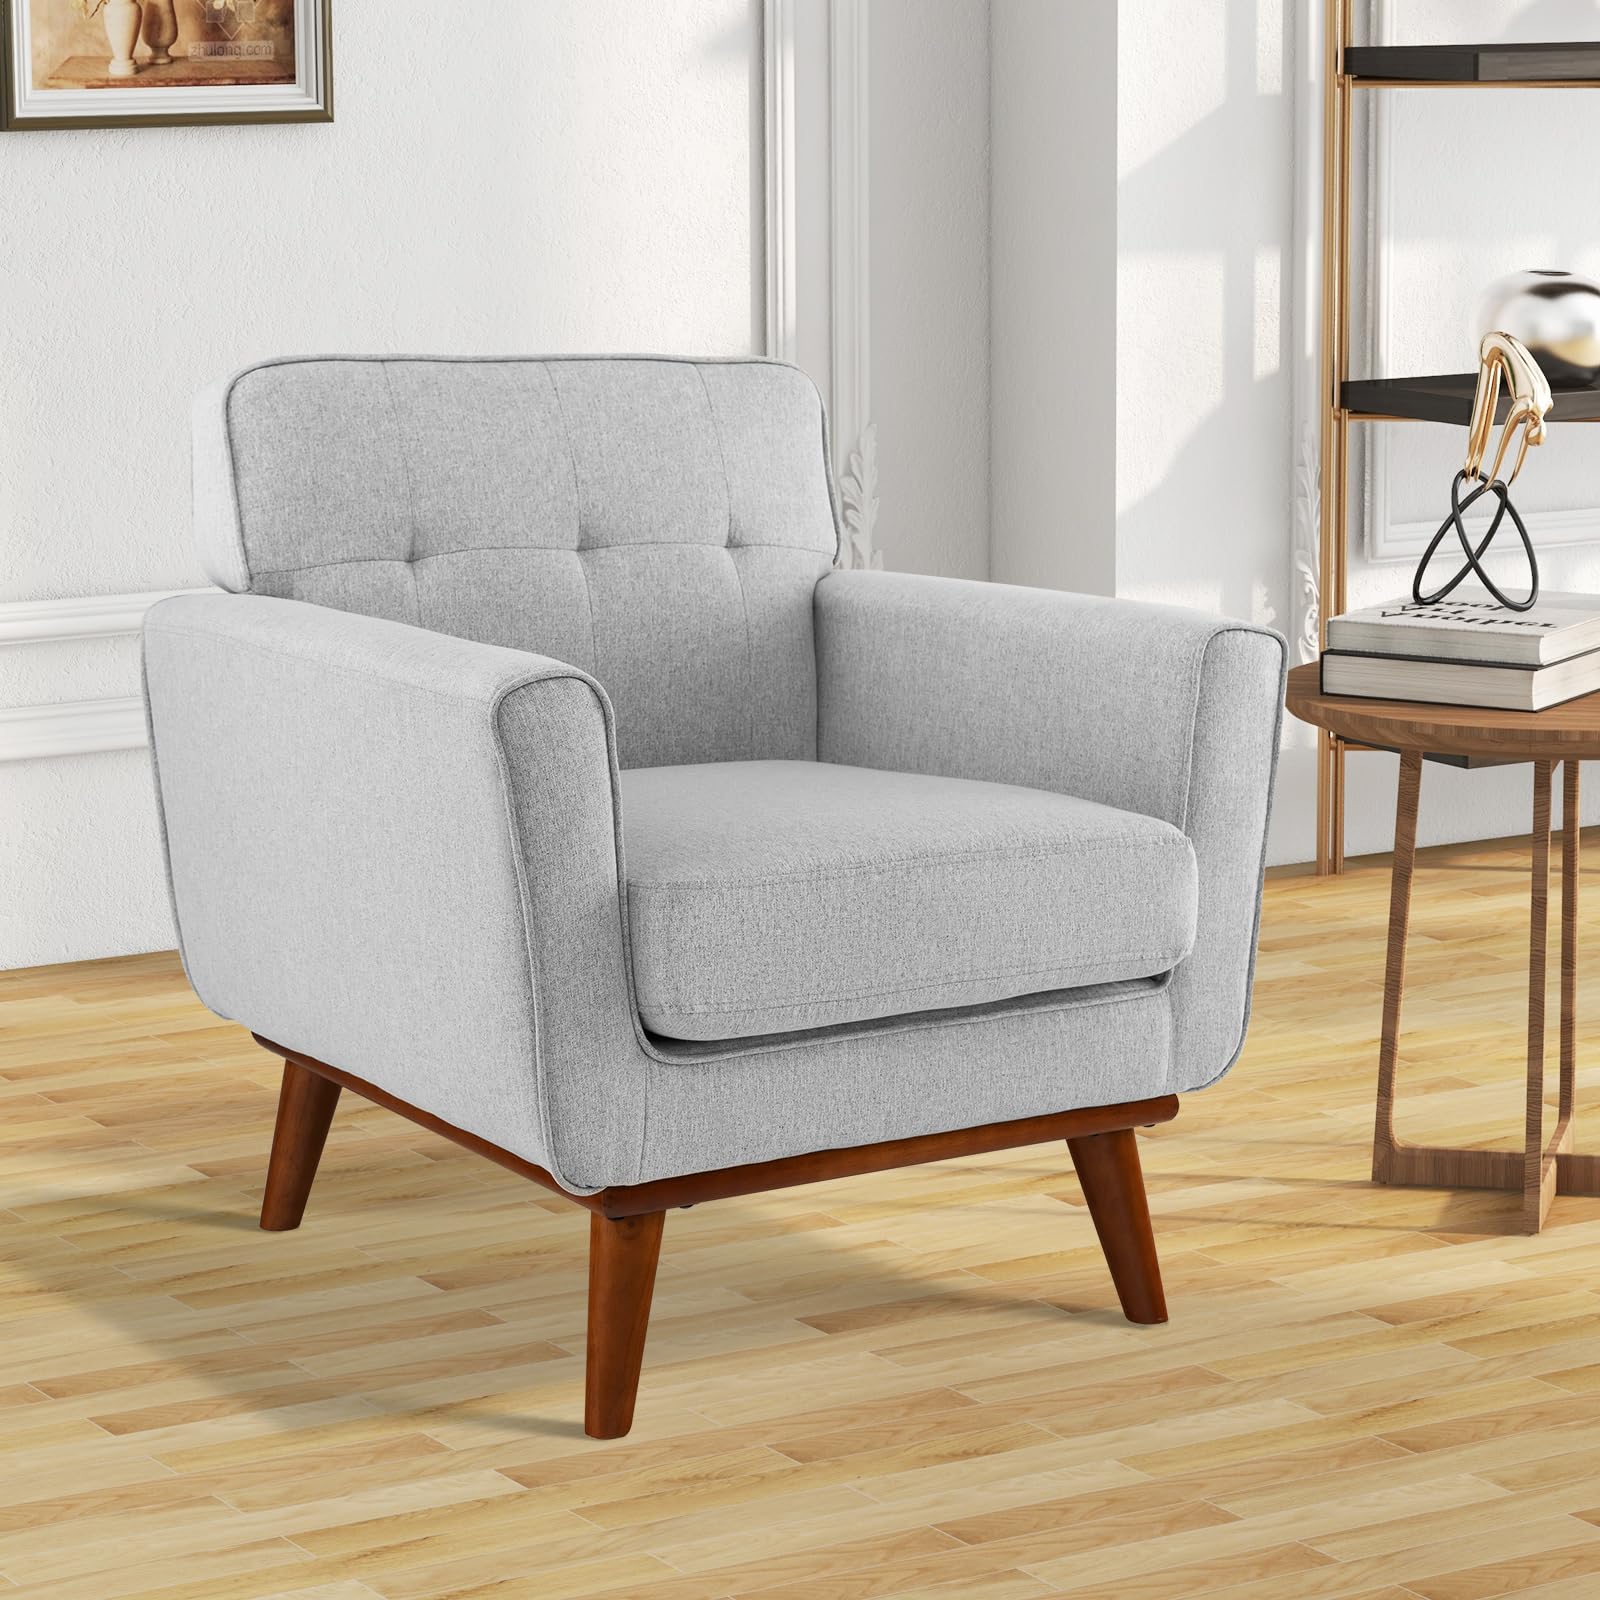 Giantex Modern Accent Chair, Upholstered Linen Fabric Armchair w/Removable Padded Seat Cushion